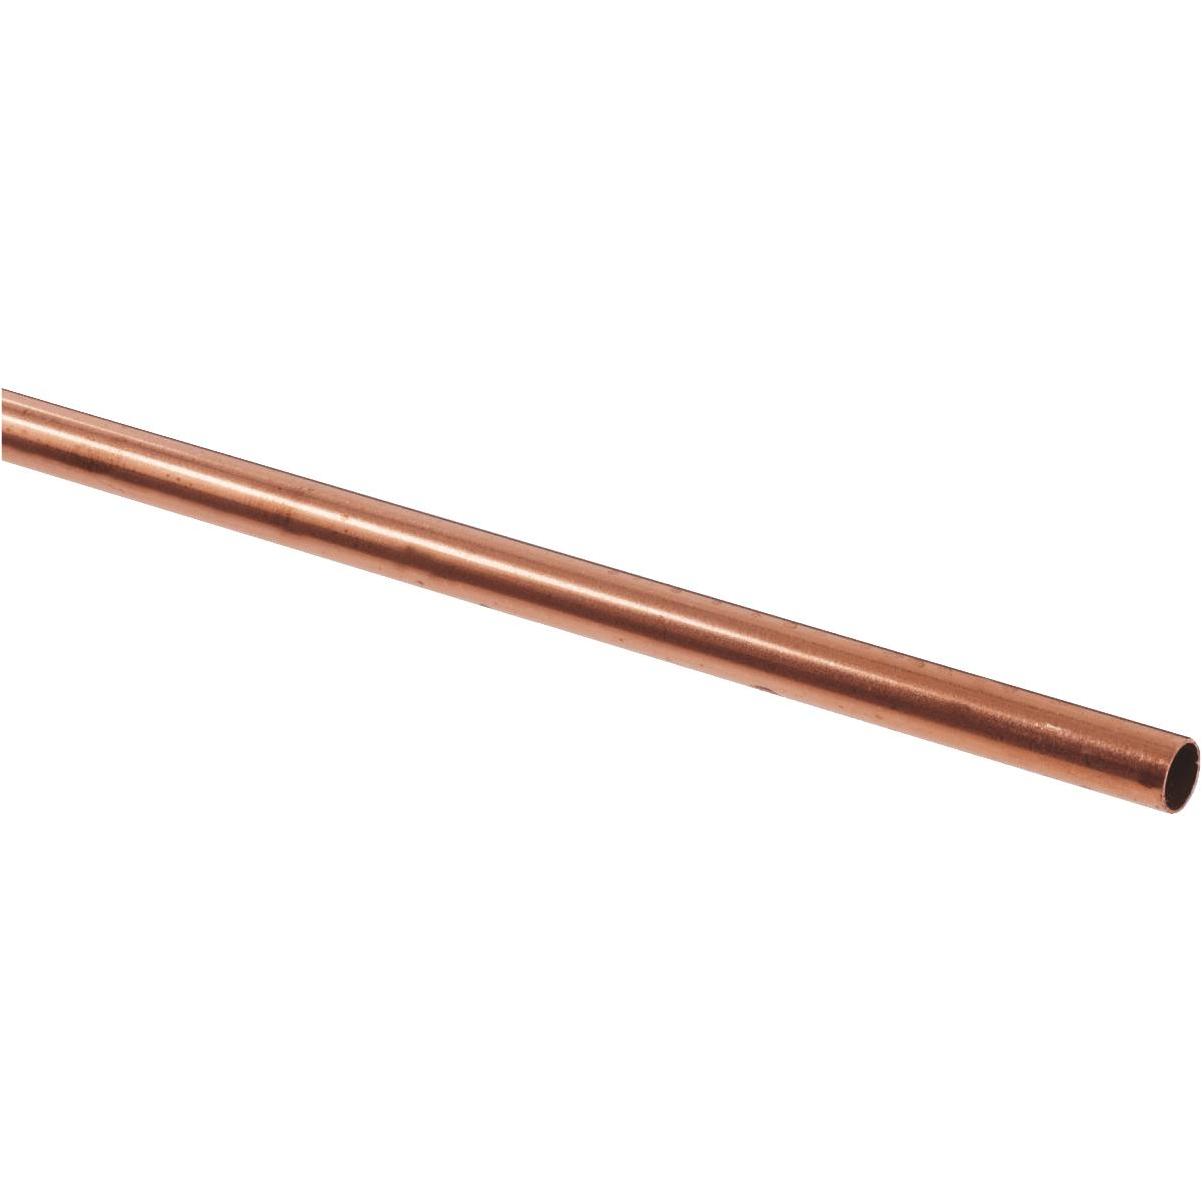 3-Count K&S 1/16 In x 12 In Solid Brass Rod 